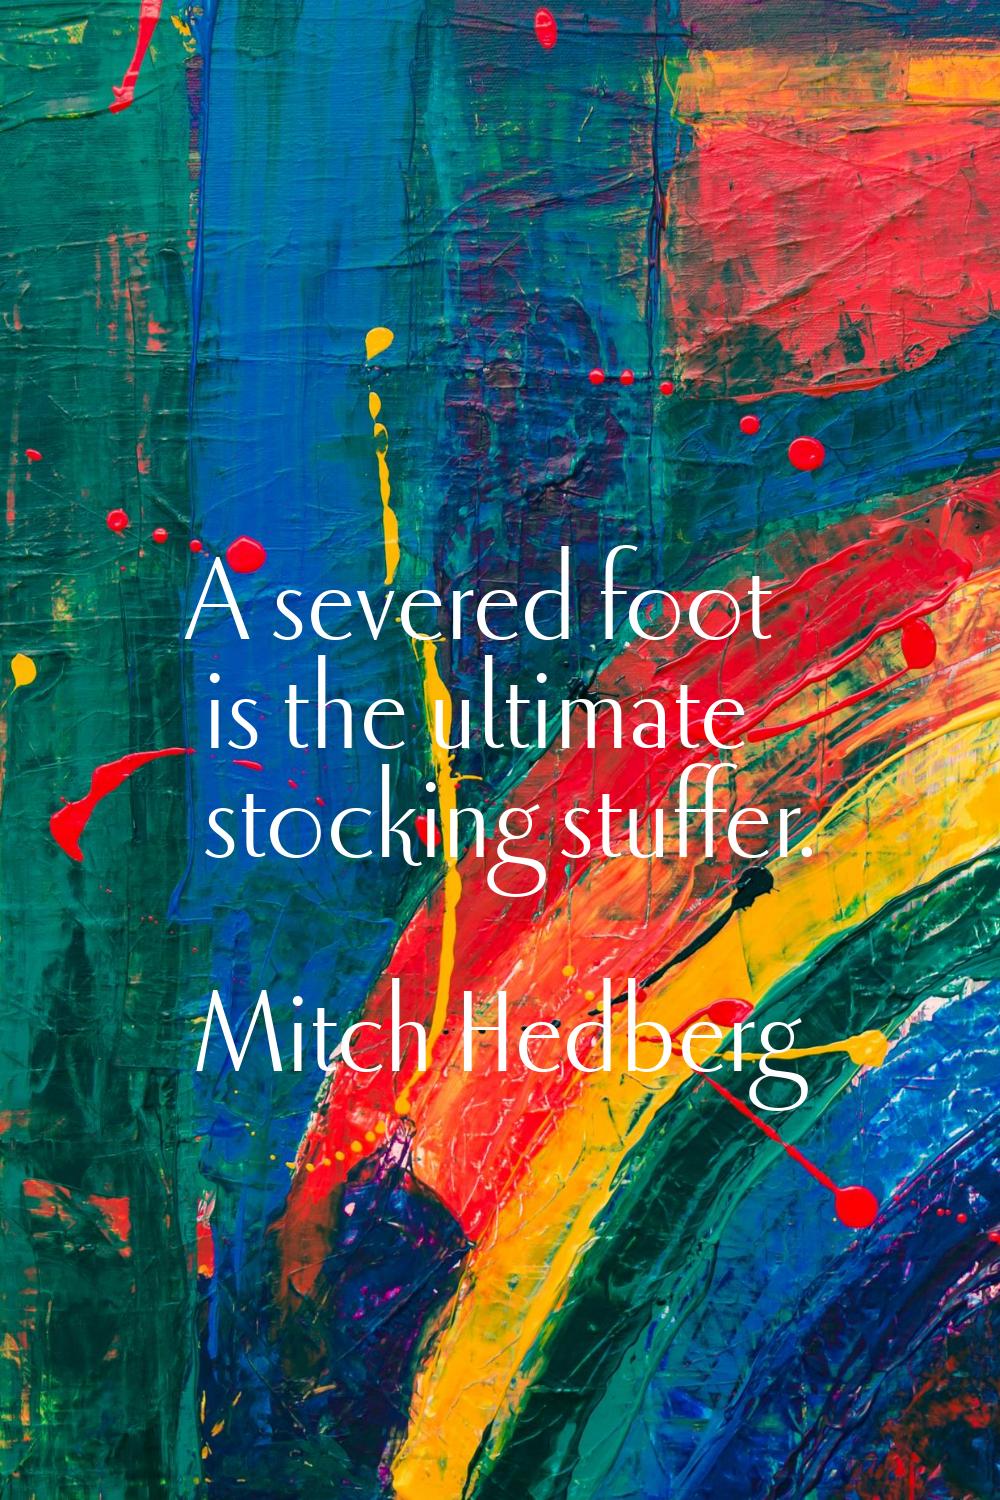 A severed foot is the ultimate stocking stuffer.